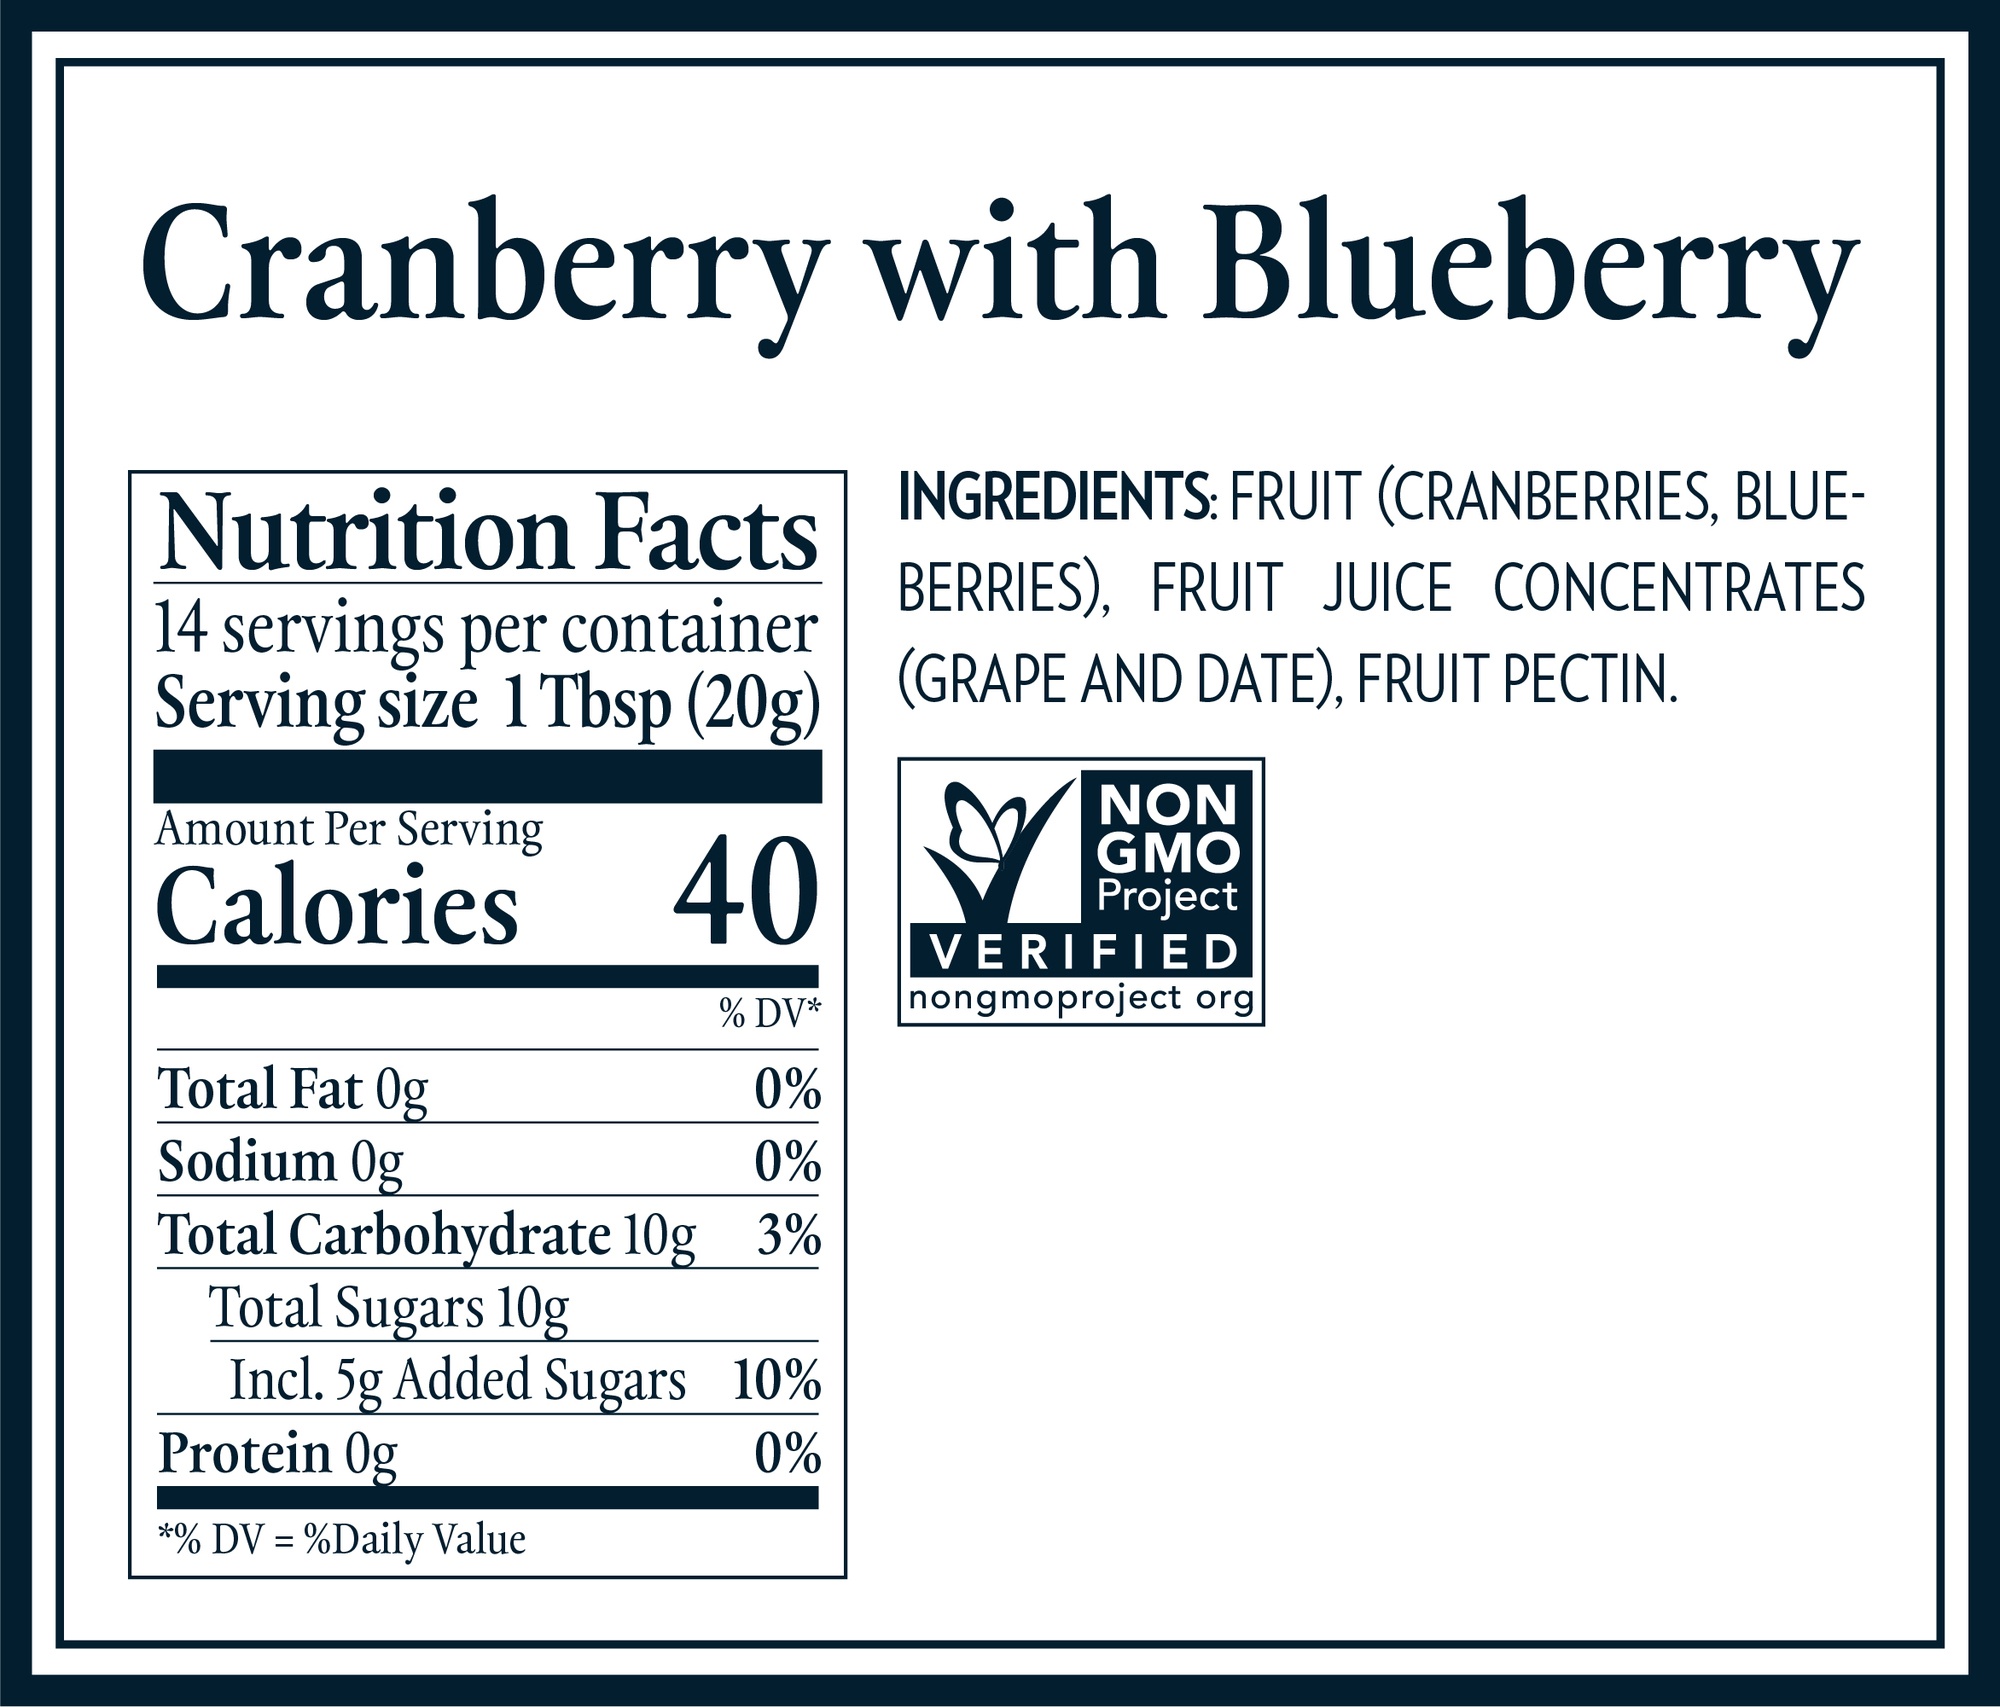 Nutrition Tables & Ingredients_cranberry blueberry